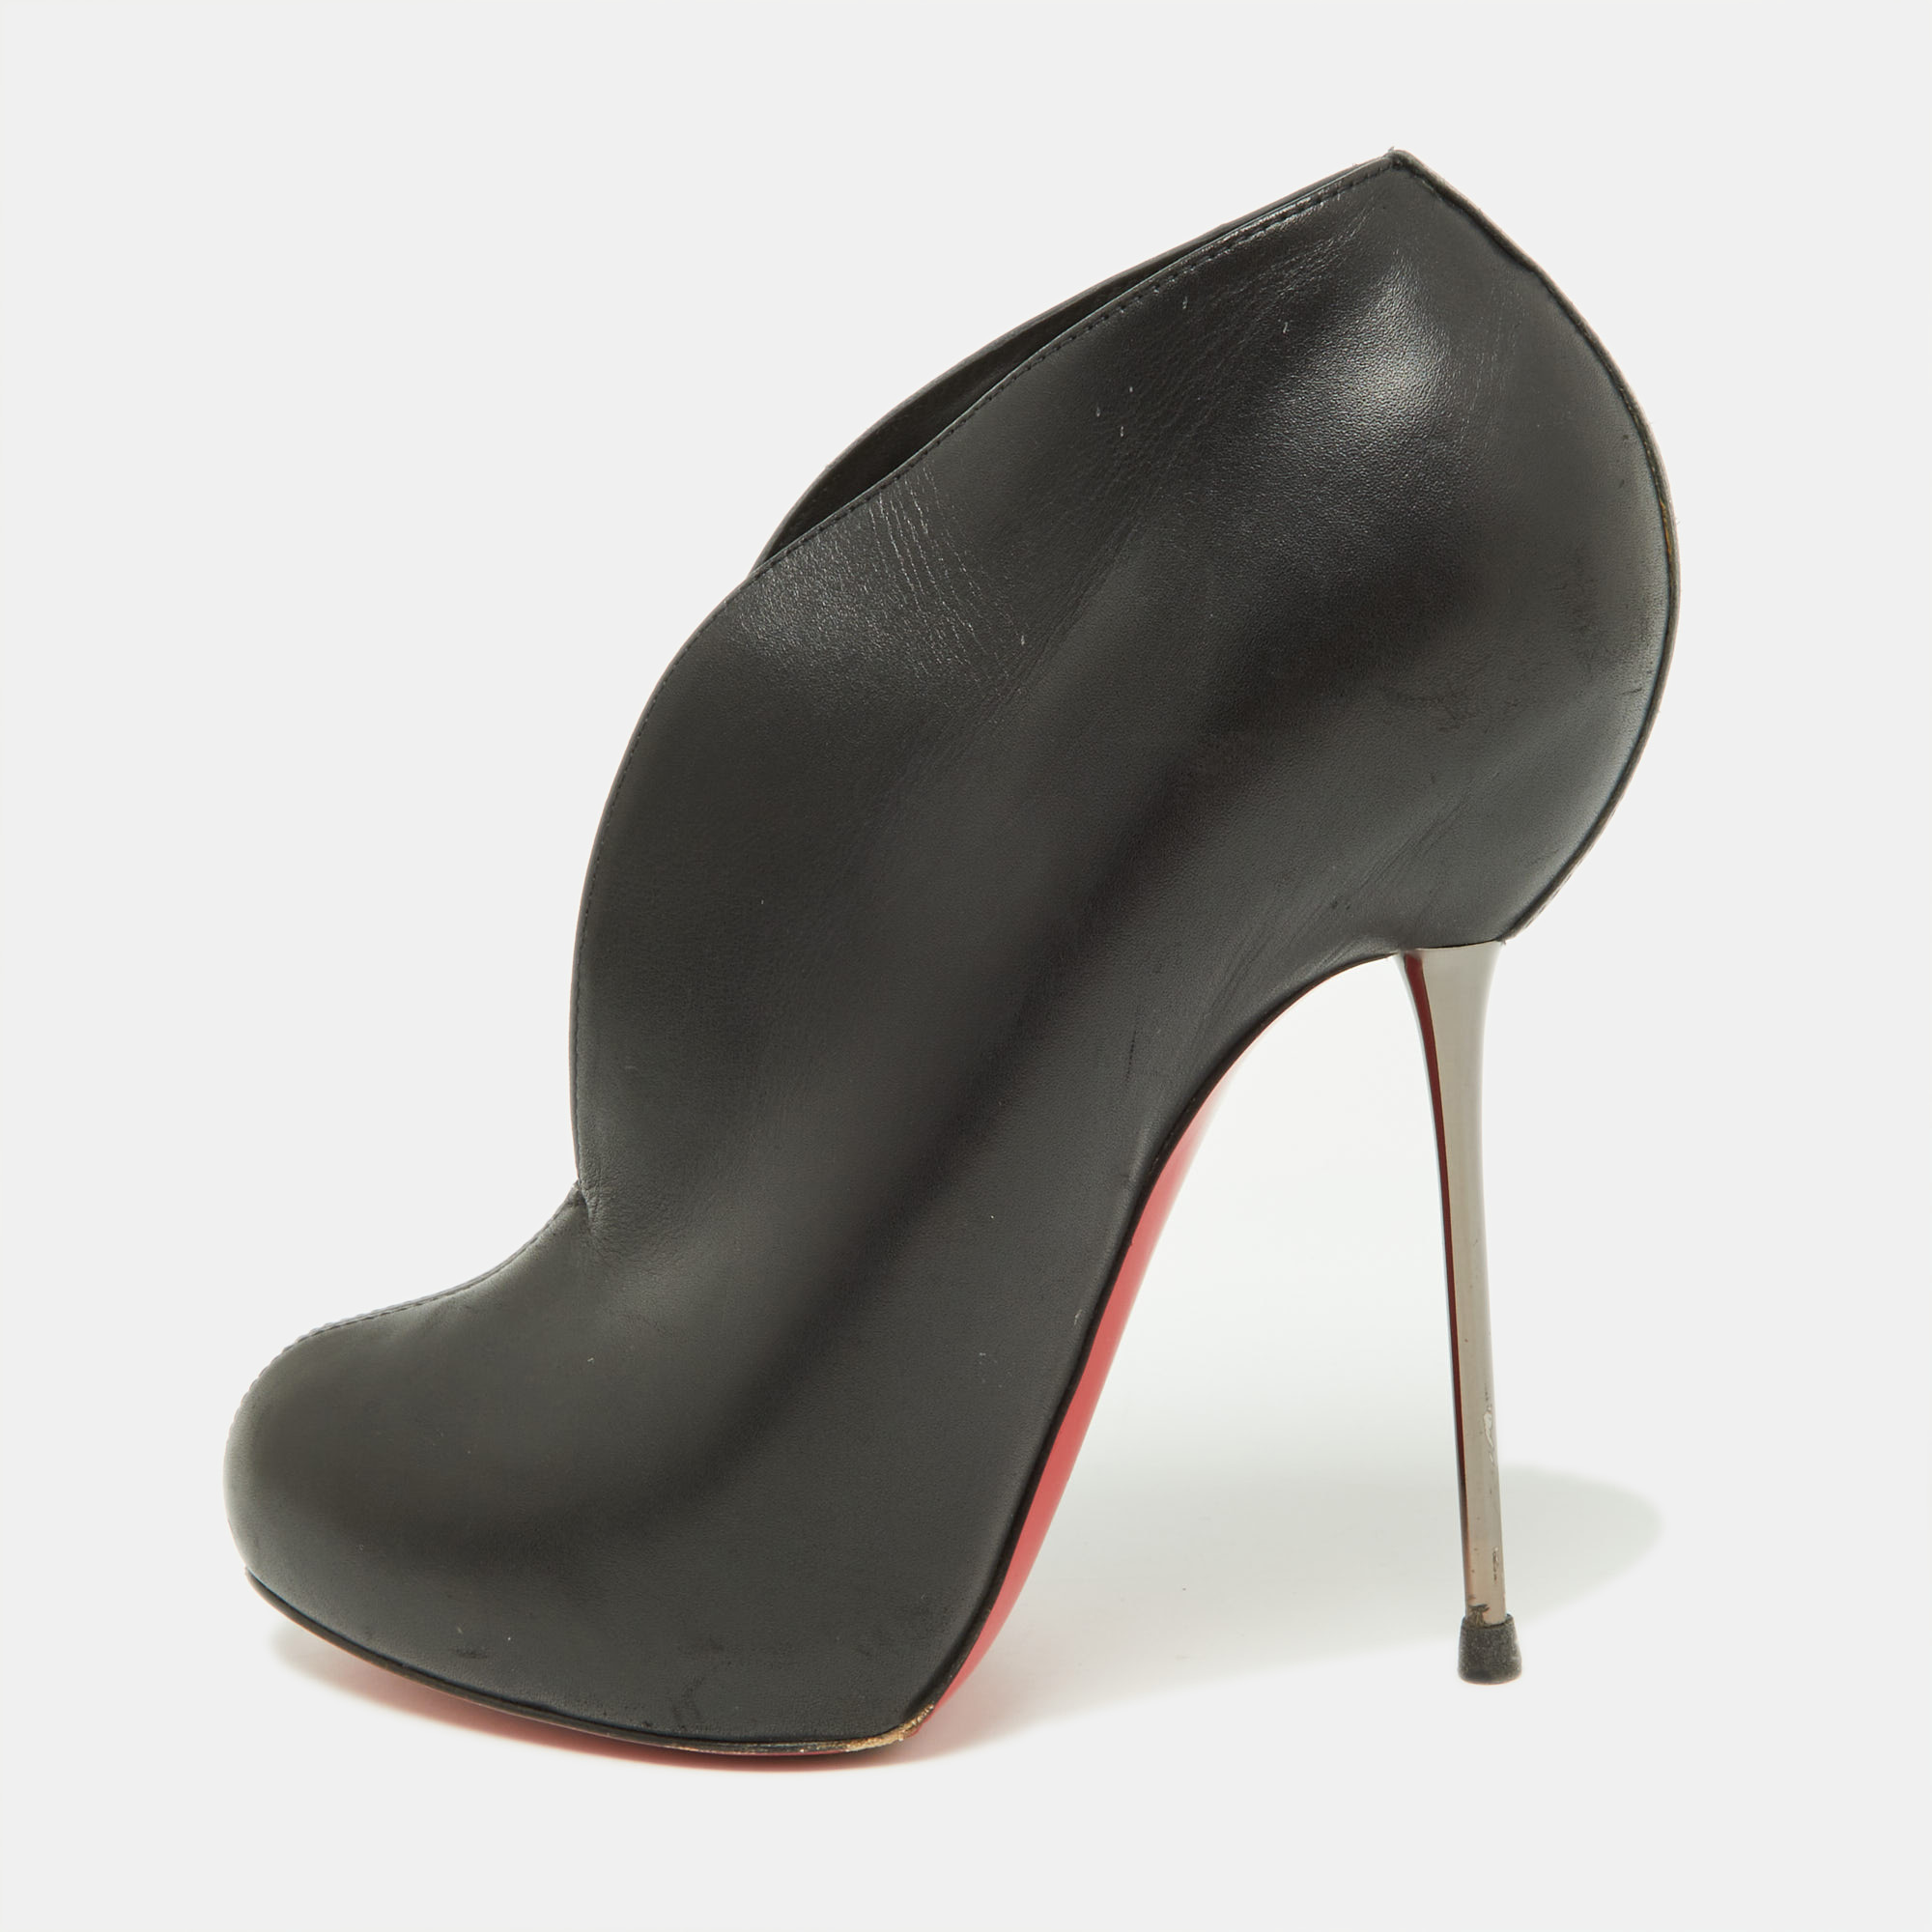 Christian louboutin black leather miss fast plato platform ankle booties size 38.5